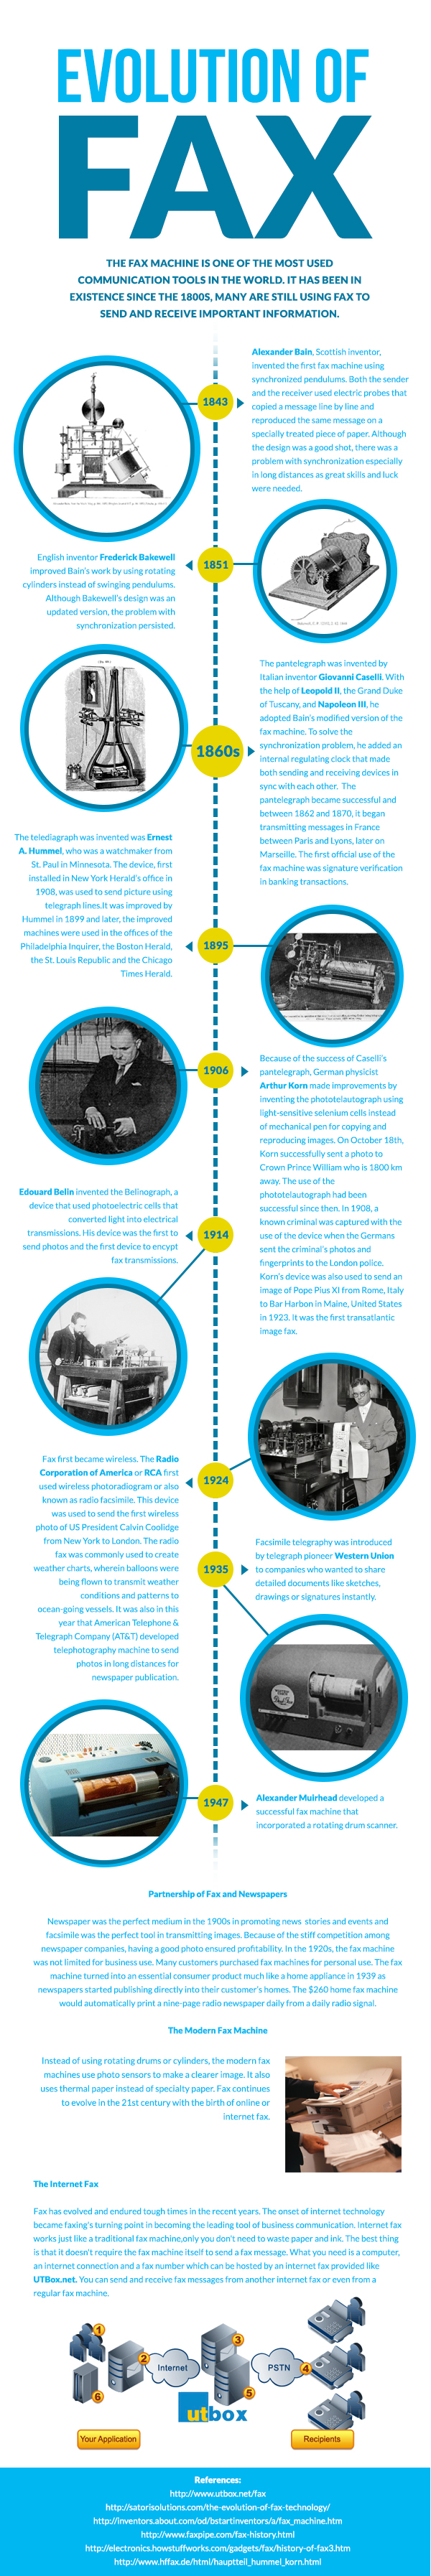 infographic of the history of fax machine and how it has evolve into internet fax